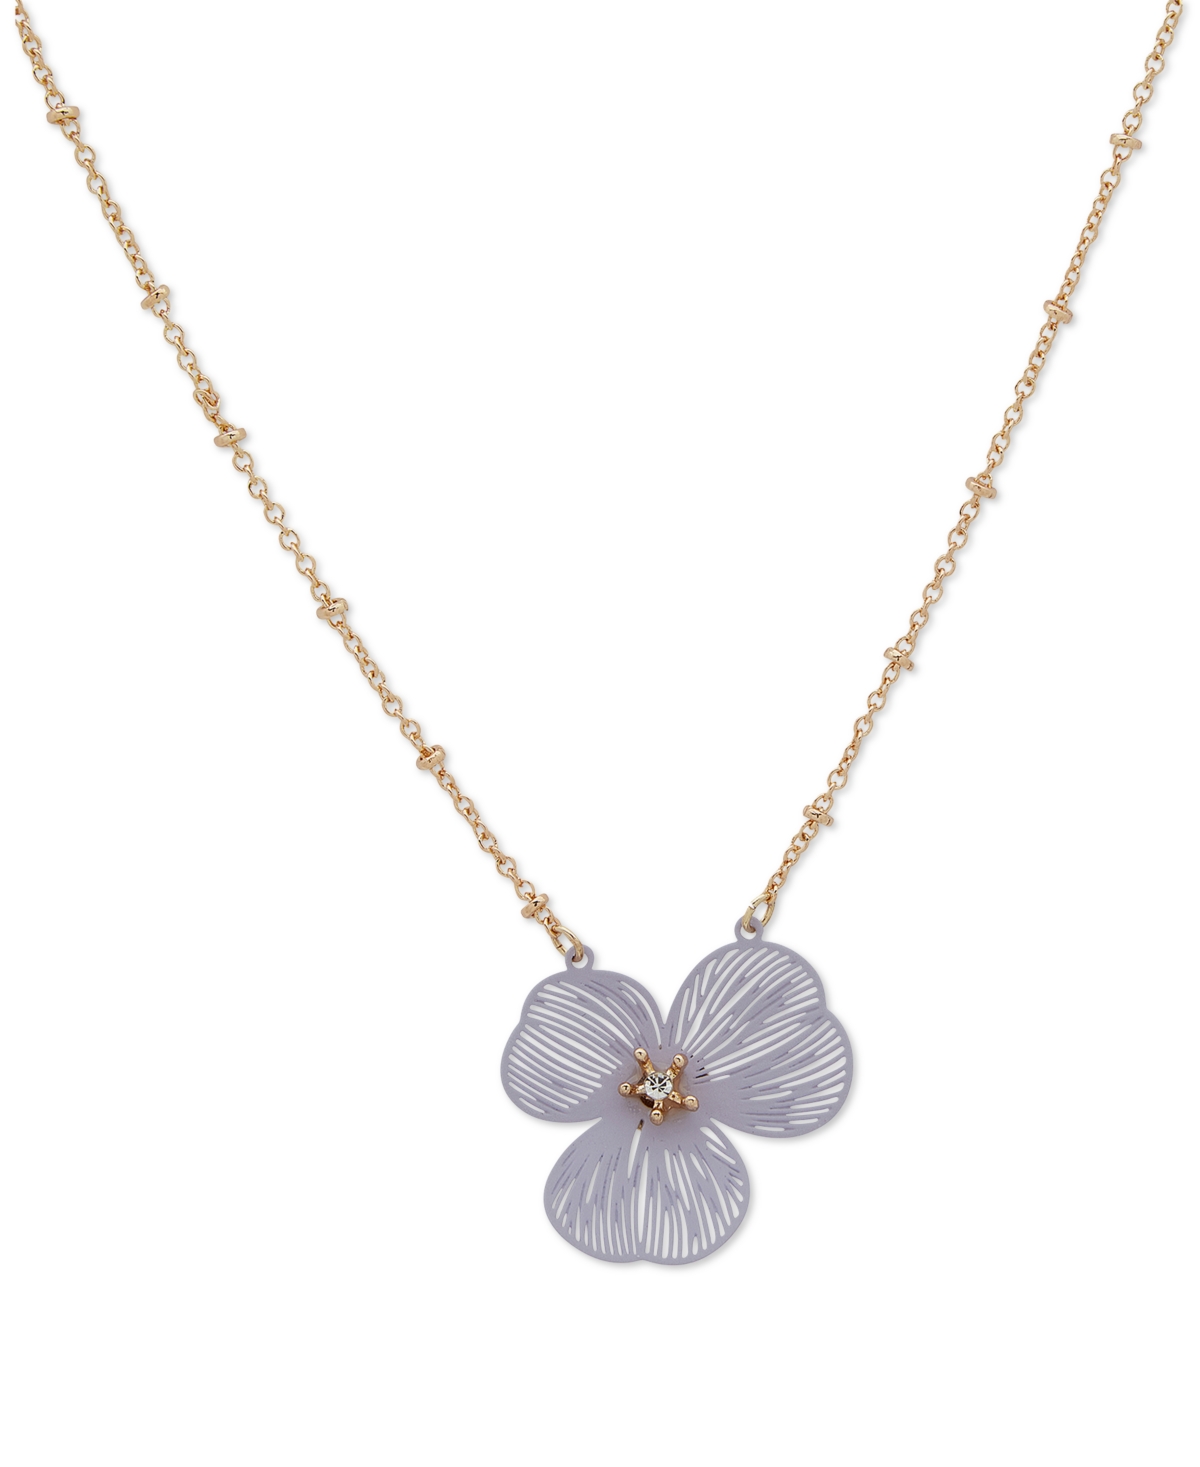 Lonna & Lilly Gold-tone Openwork Flower Pendant Necklace, 16" + 3" Extender In Lavender